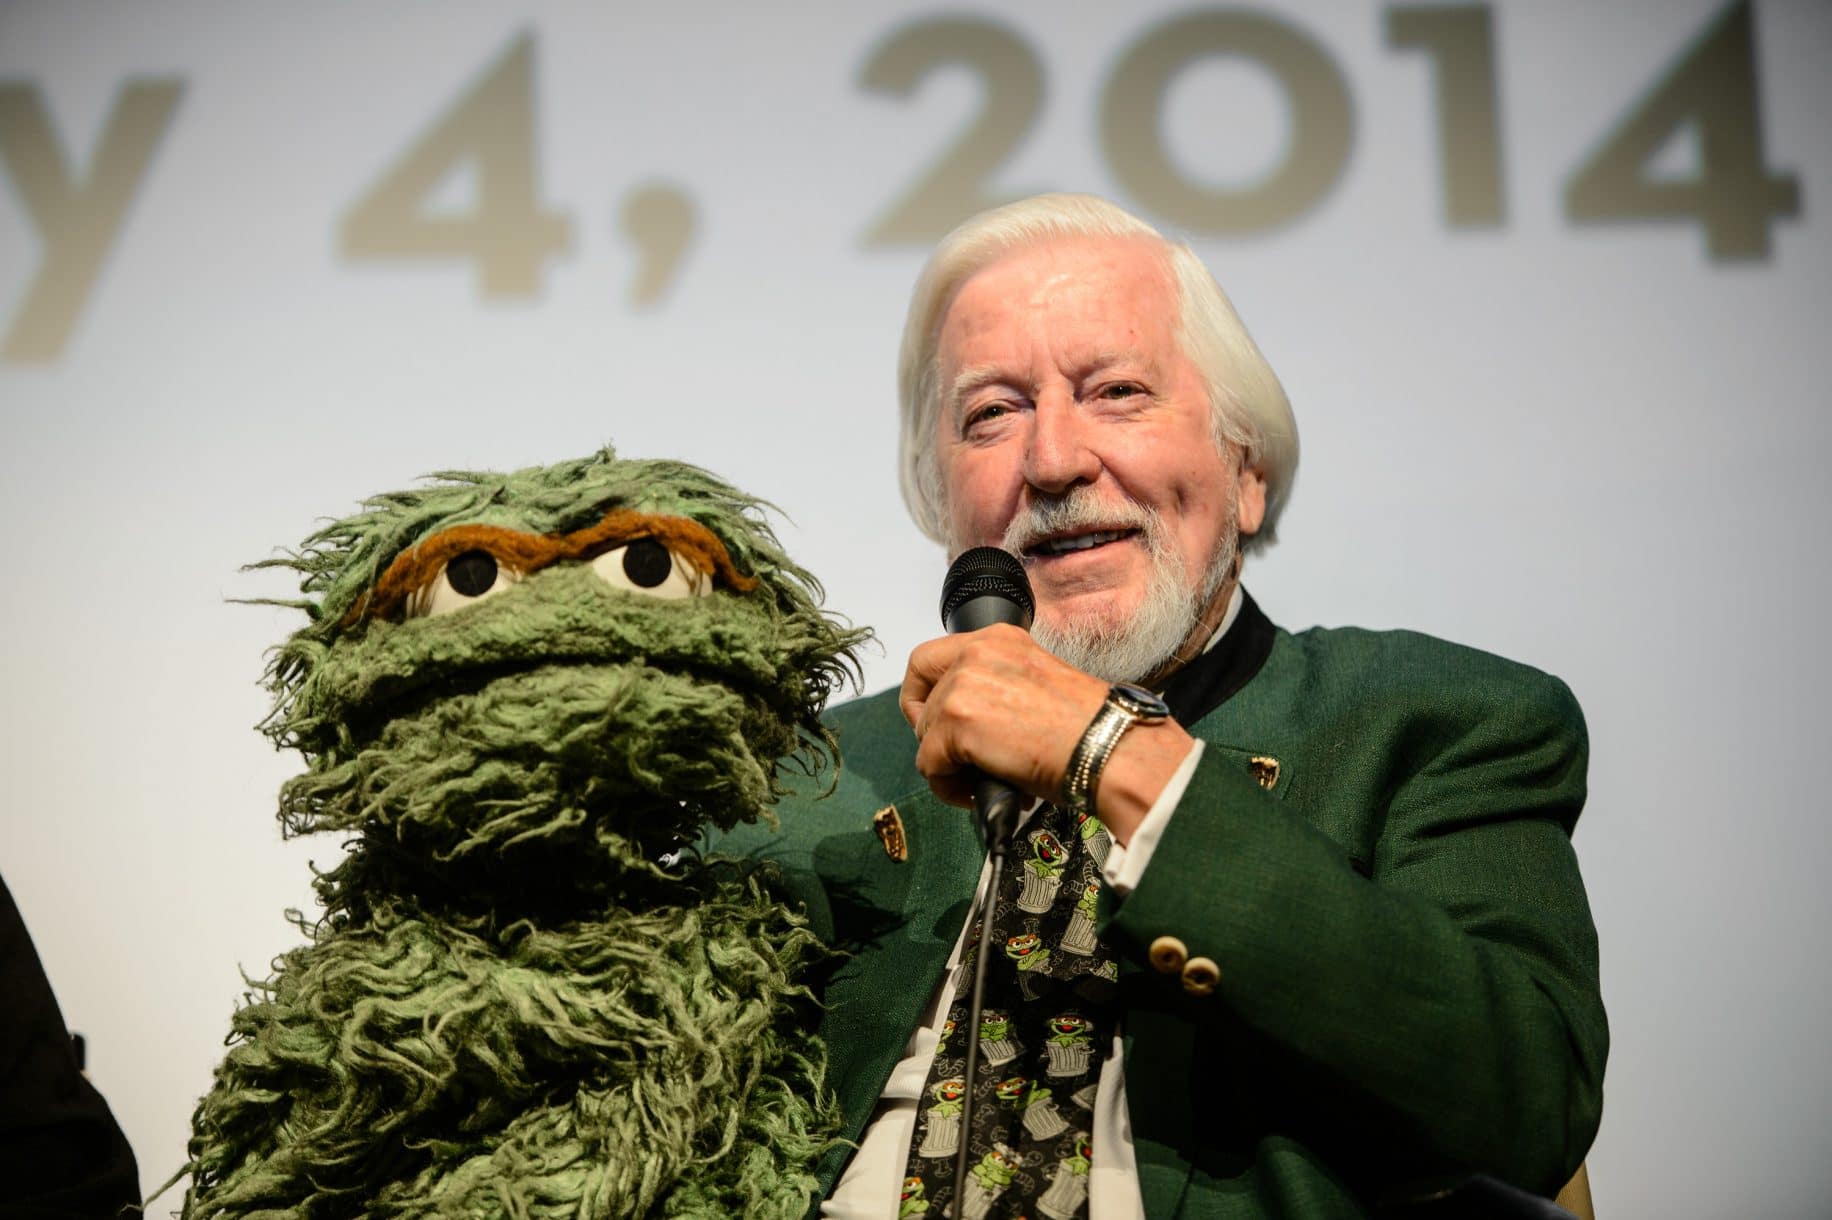 Caroll Spinney puppeted Oscar and Big Bird since 1969, to say he will be missed is a huge understatement. Pic credit: PBS/Sesame Street Workshop